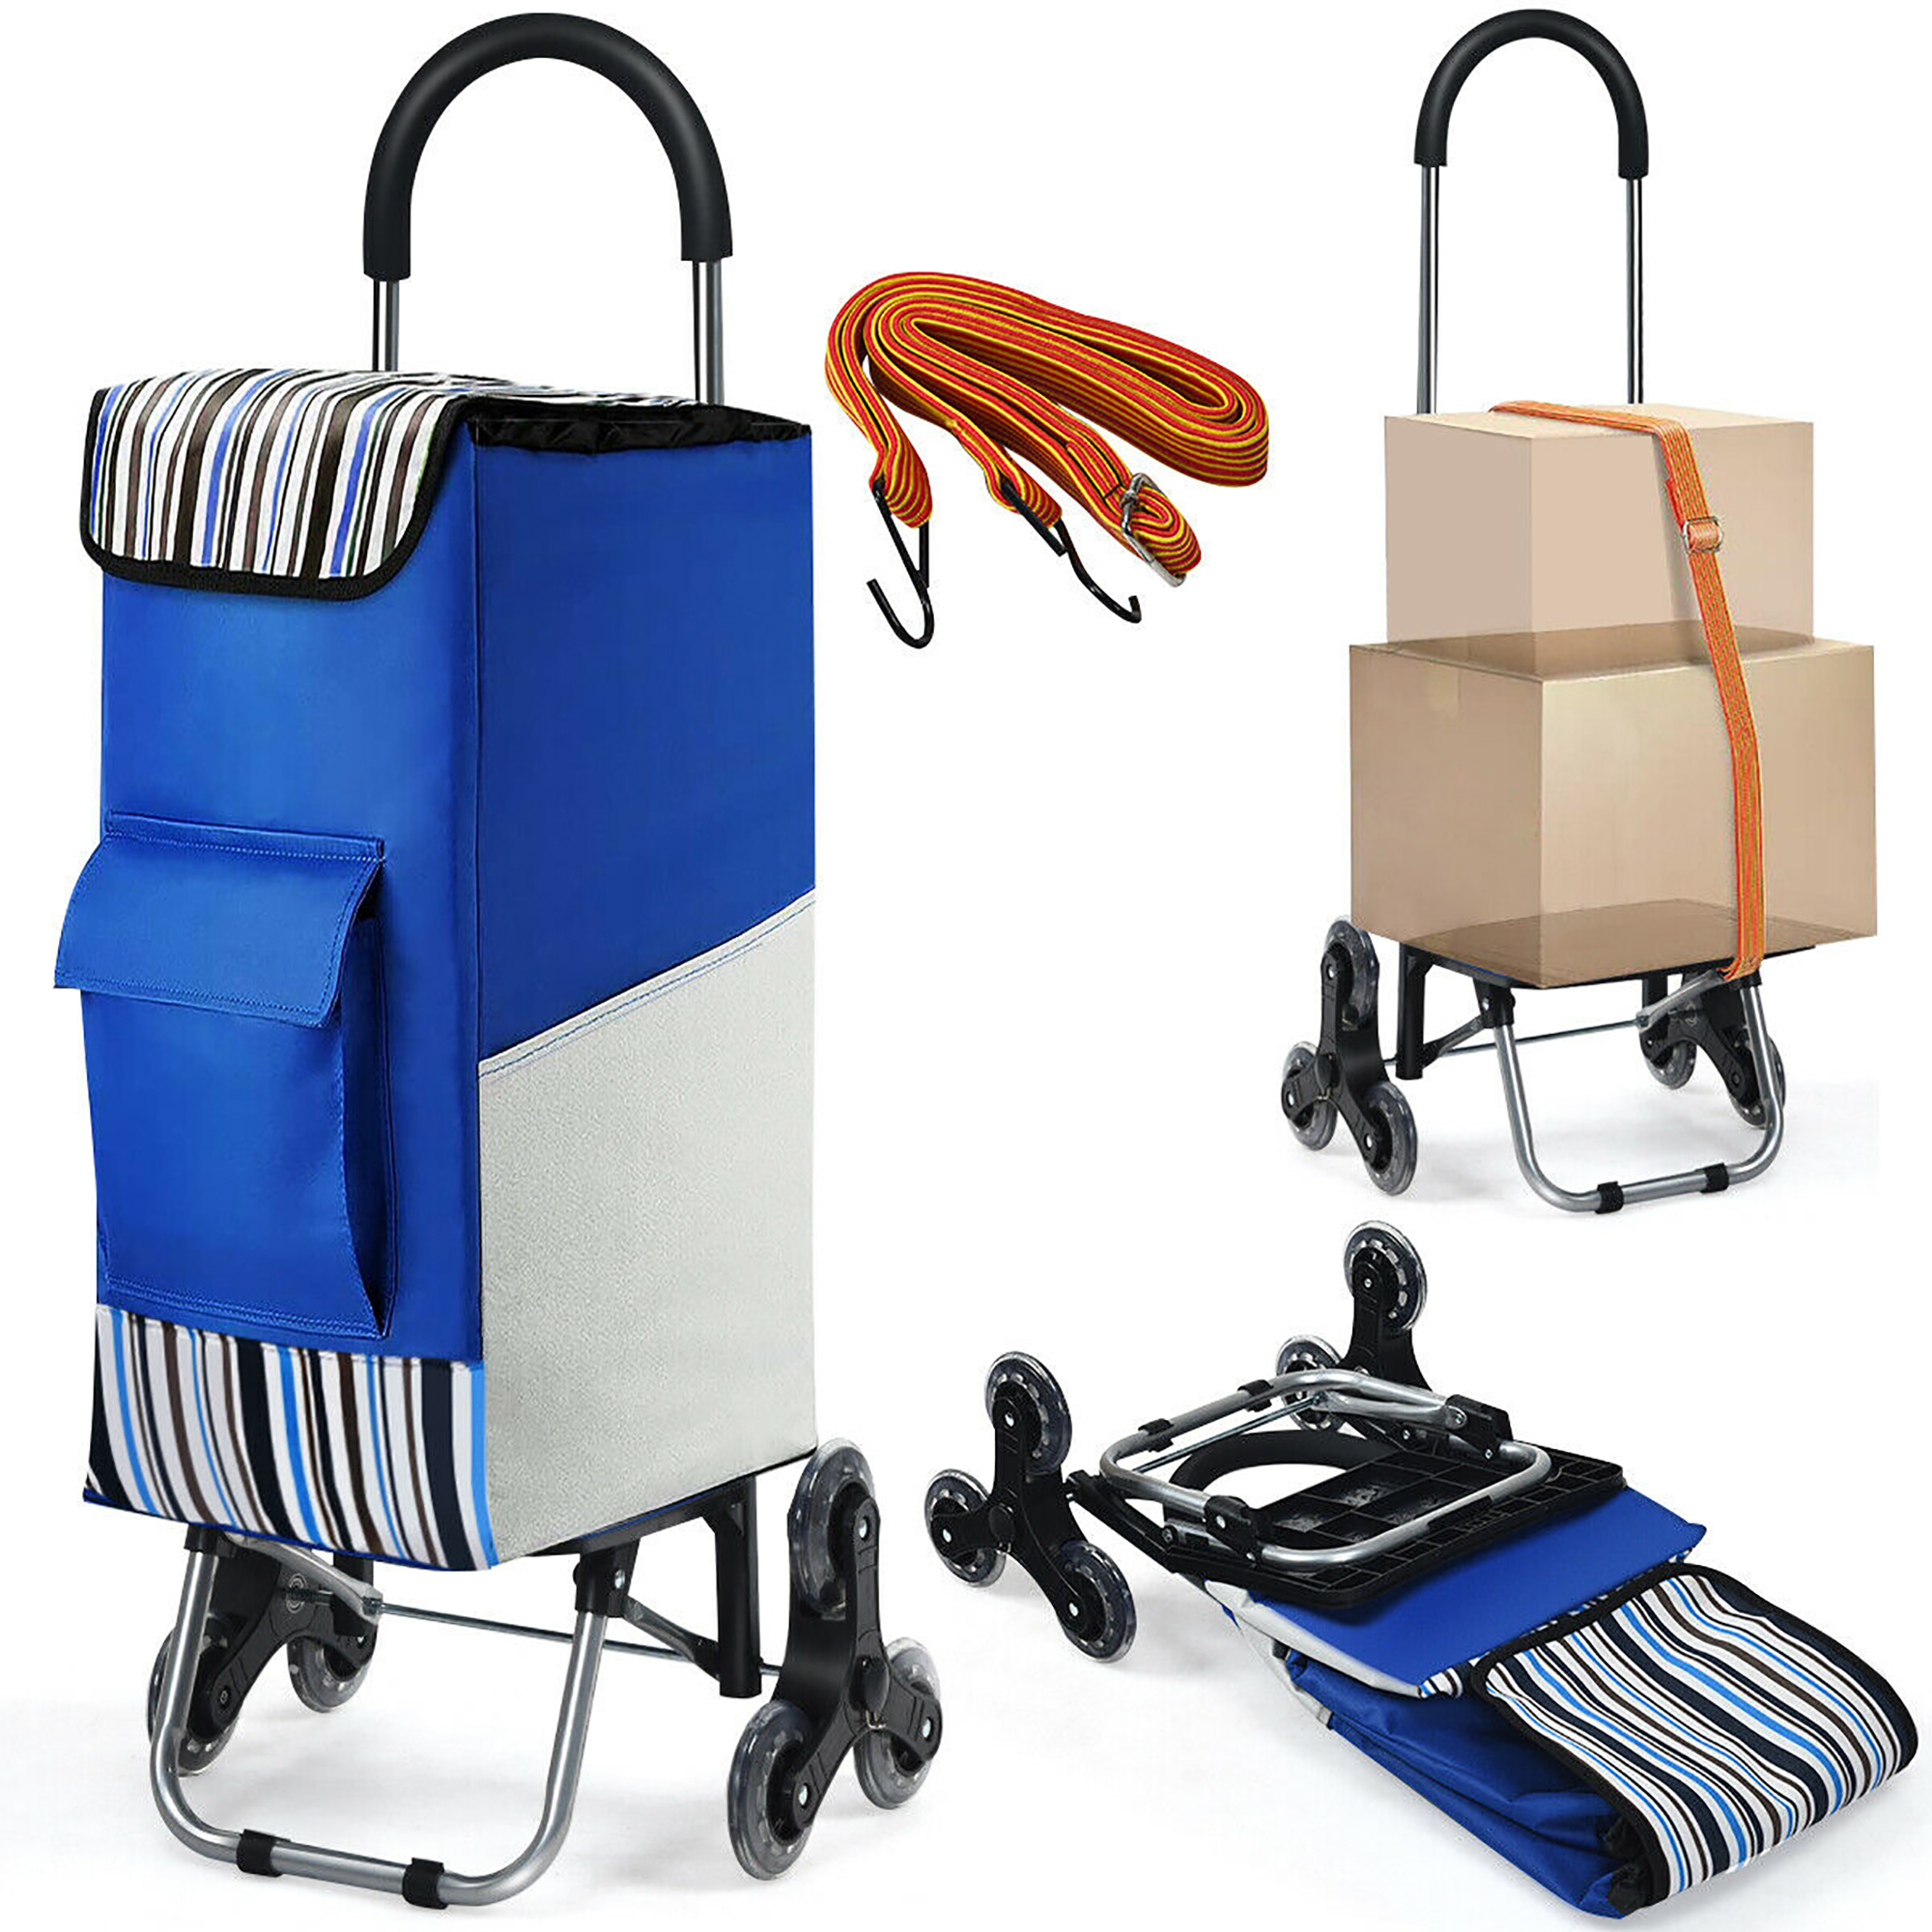 Zfusshop Shopping Cart Climb Stairs Trolley Old Man Six Rounds Portable Foldable Luggage Cart Grocery,Home 